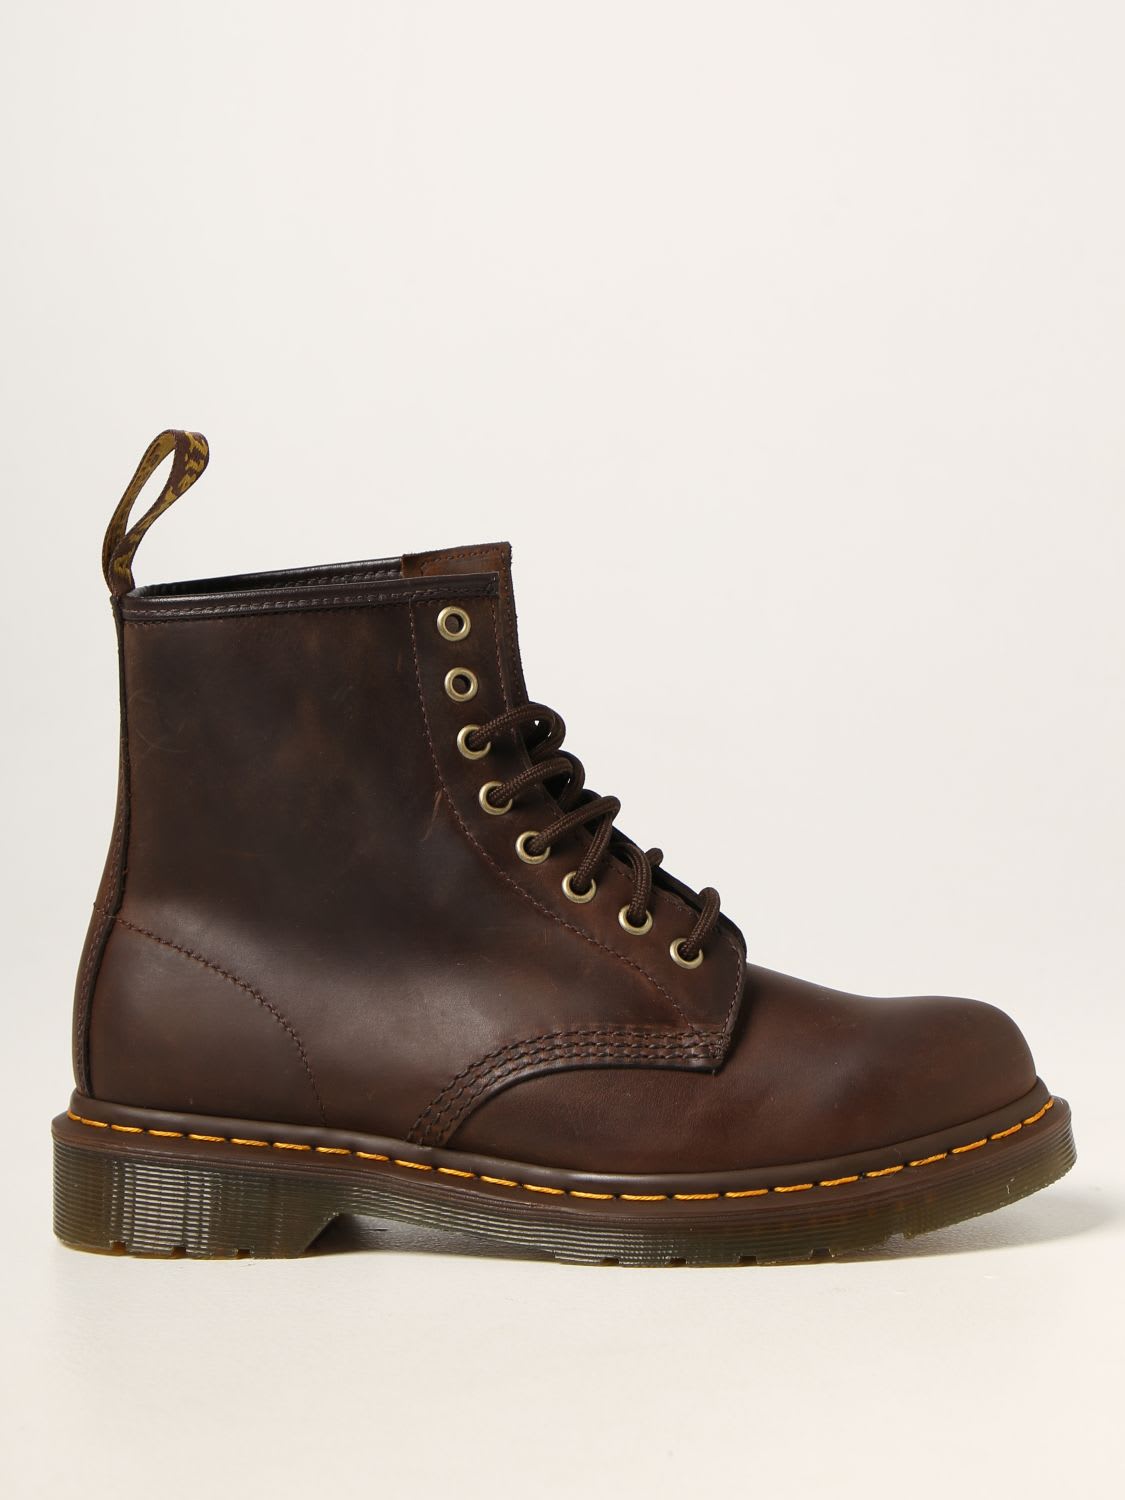 Dr. Martens Flat Booties Dr. Martens 1460 Gaucho Boots In Crazy Horse Leather